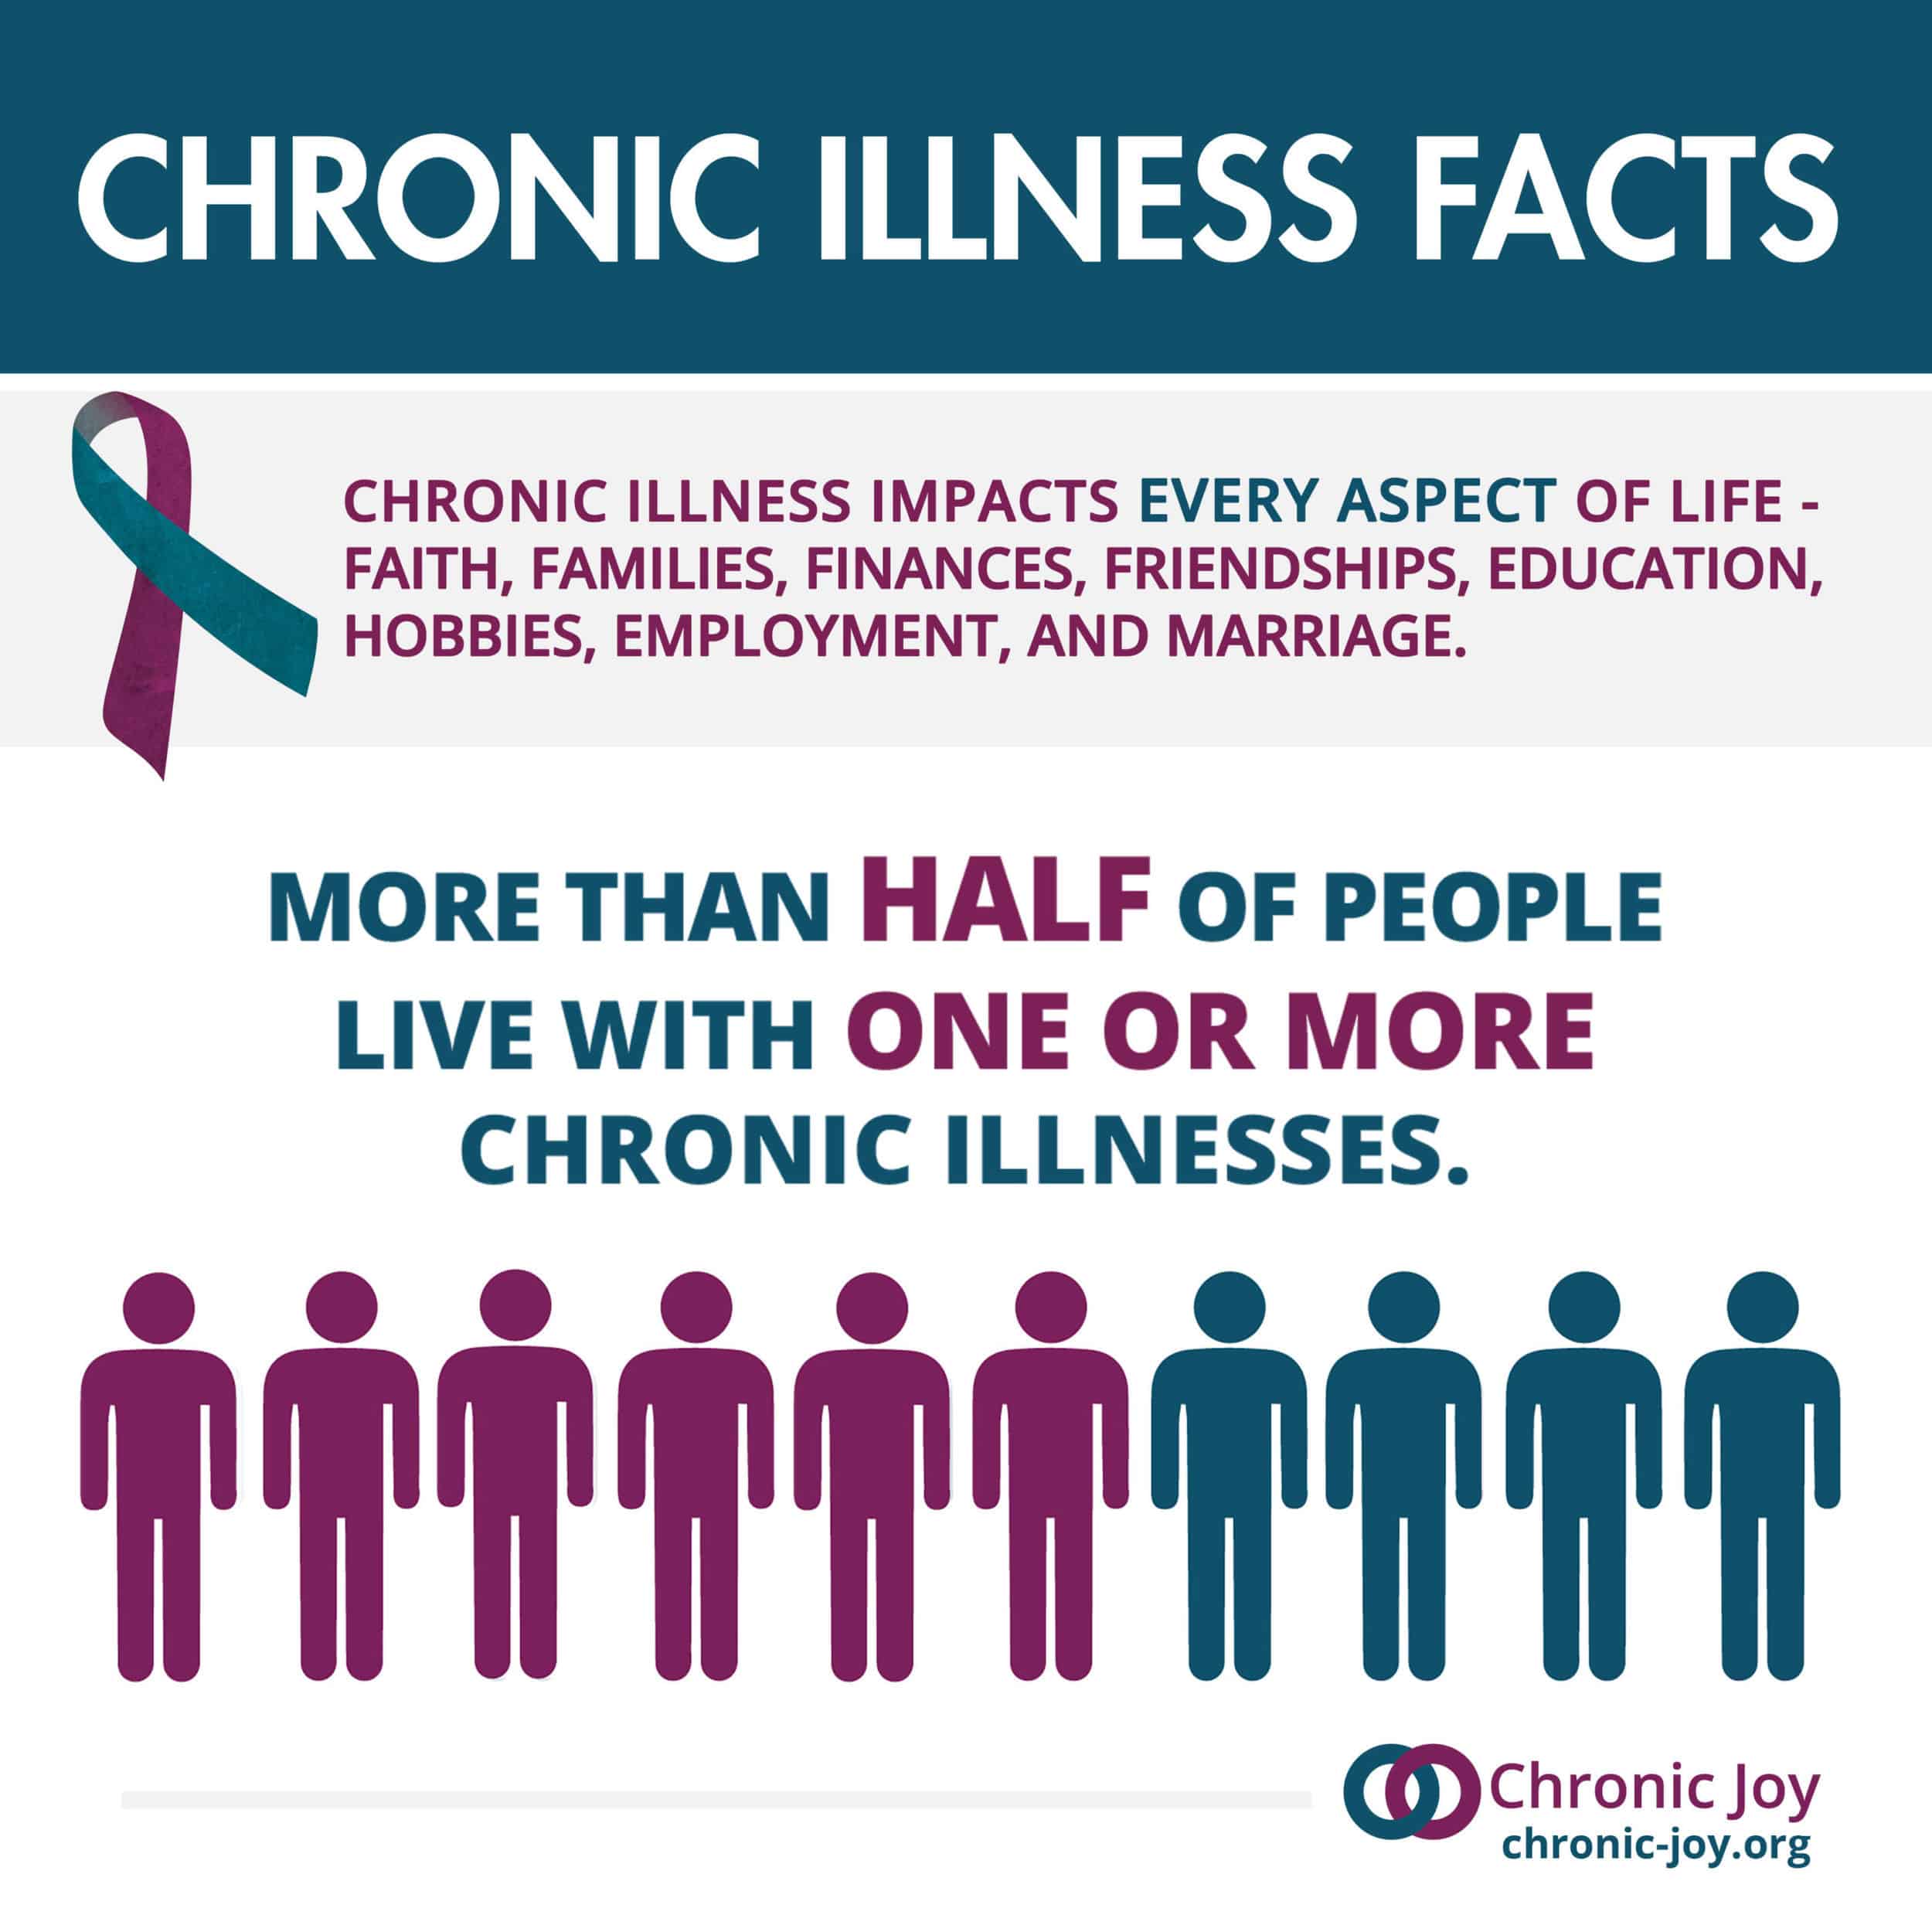 More than half of people live with chronic illness.